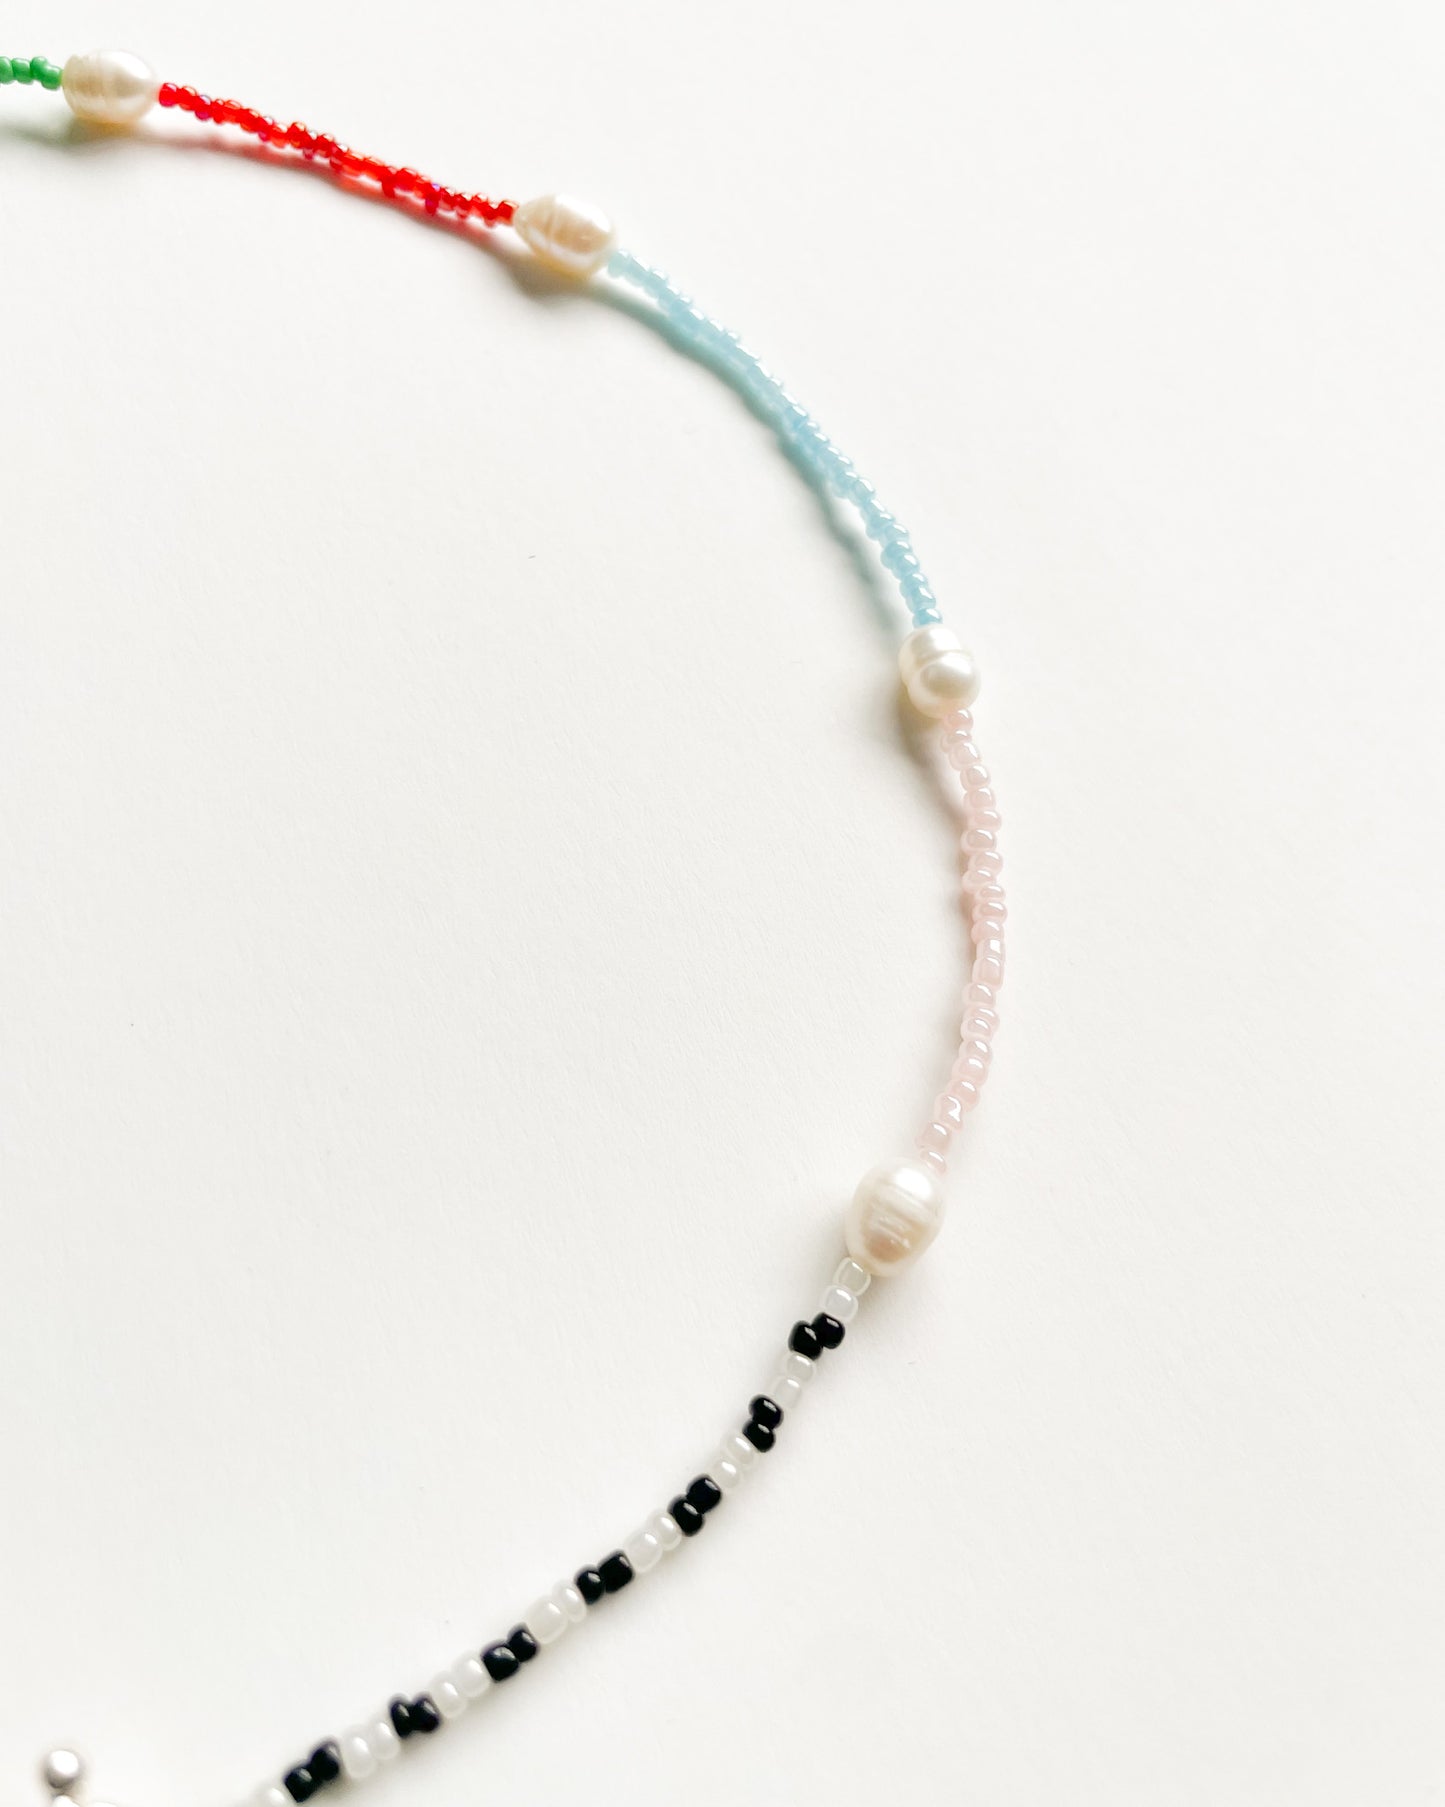 Multicolored Beads and Pearls Necklace